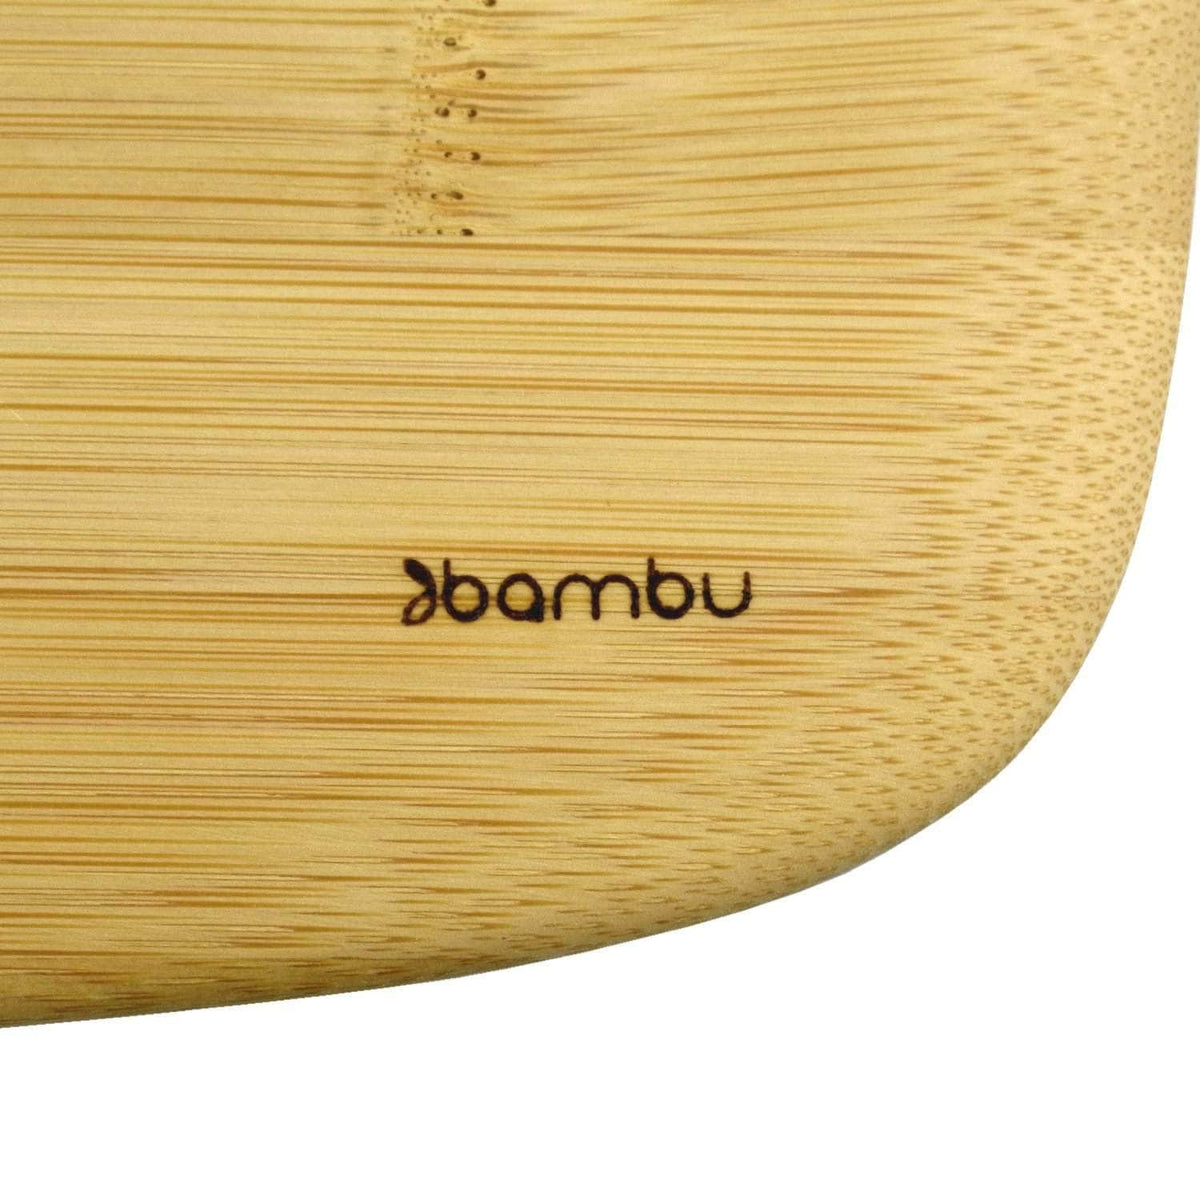 *NEW* Classic bamboo cutting &amp; serving boards